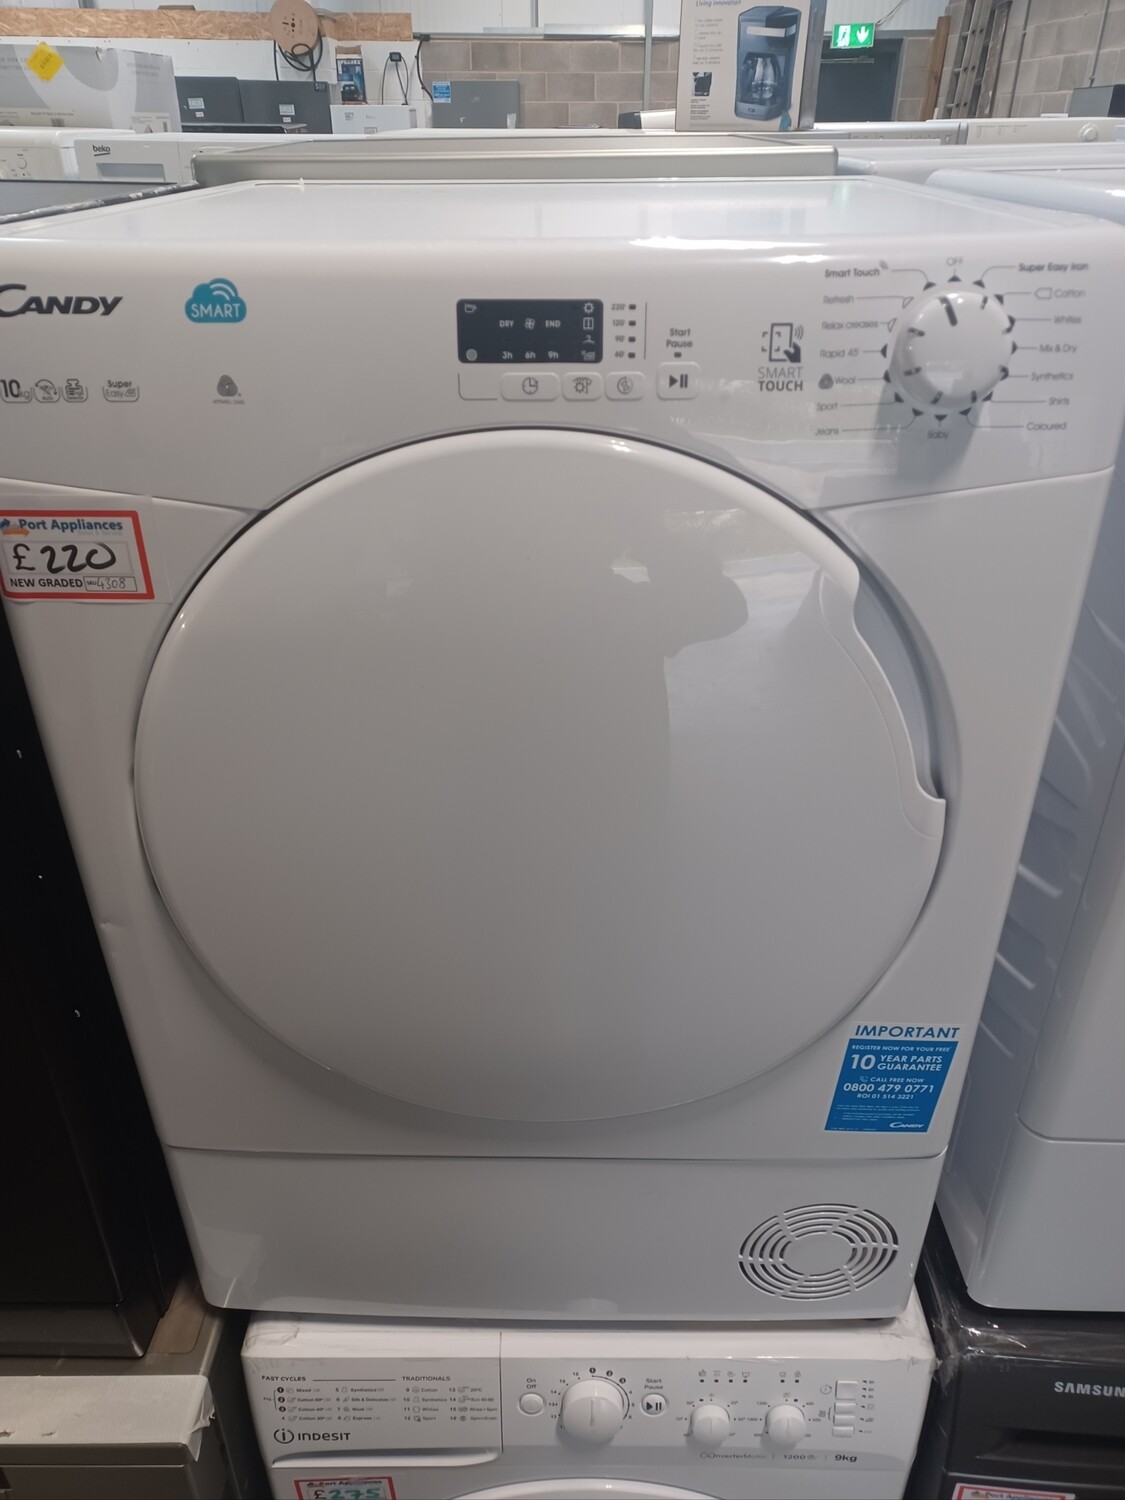 Candy CSC10LF-80 Condenser Dryer  White New Graded 12 Month Guarantee. This tem is located at our warehouse